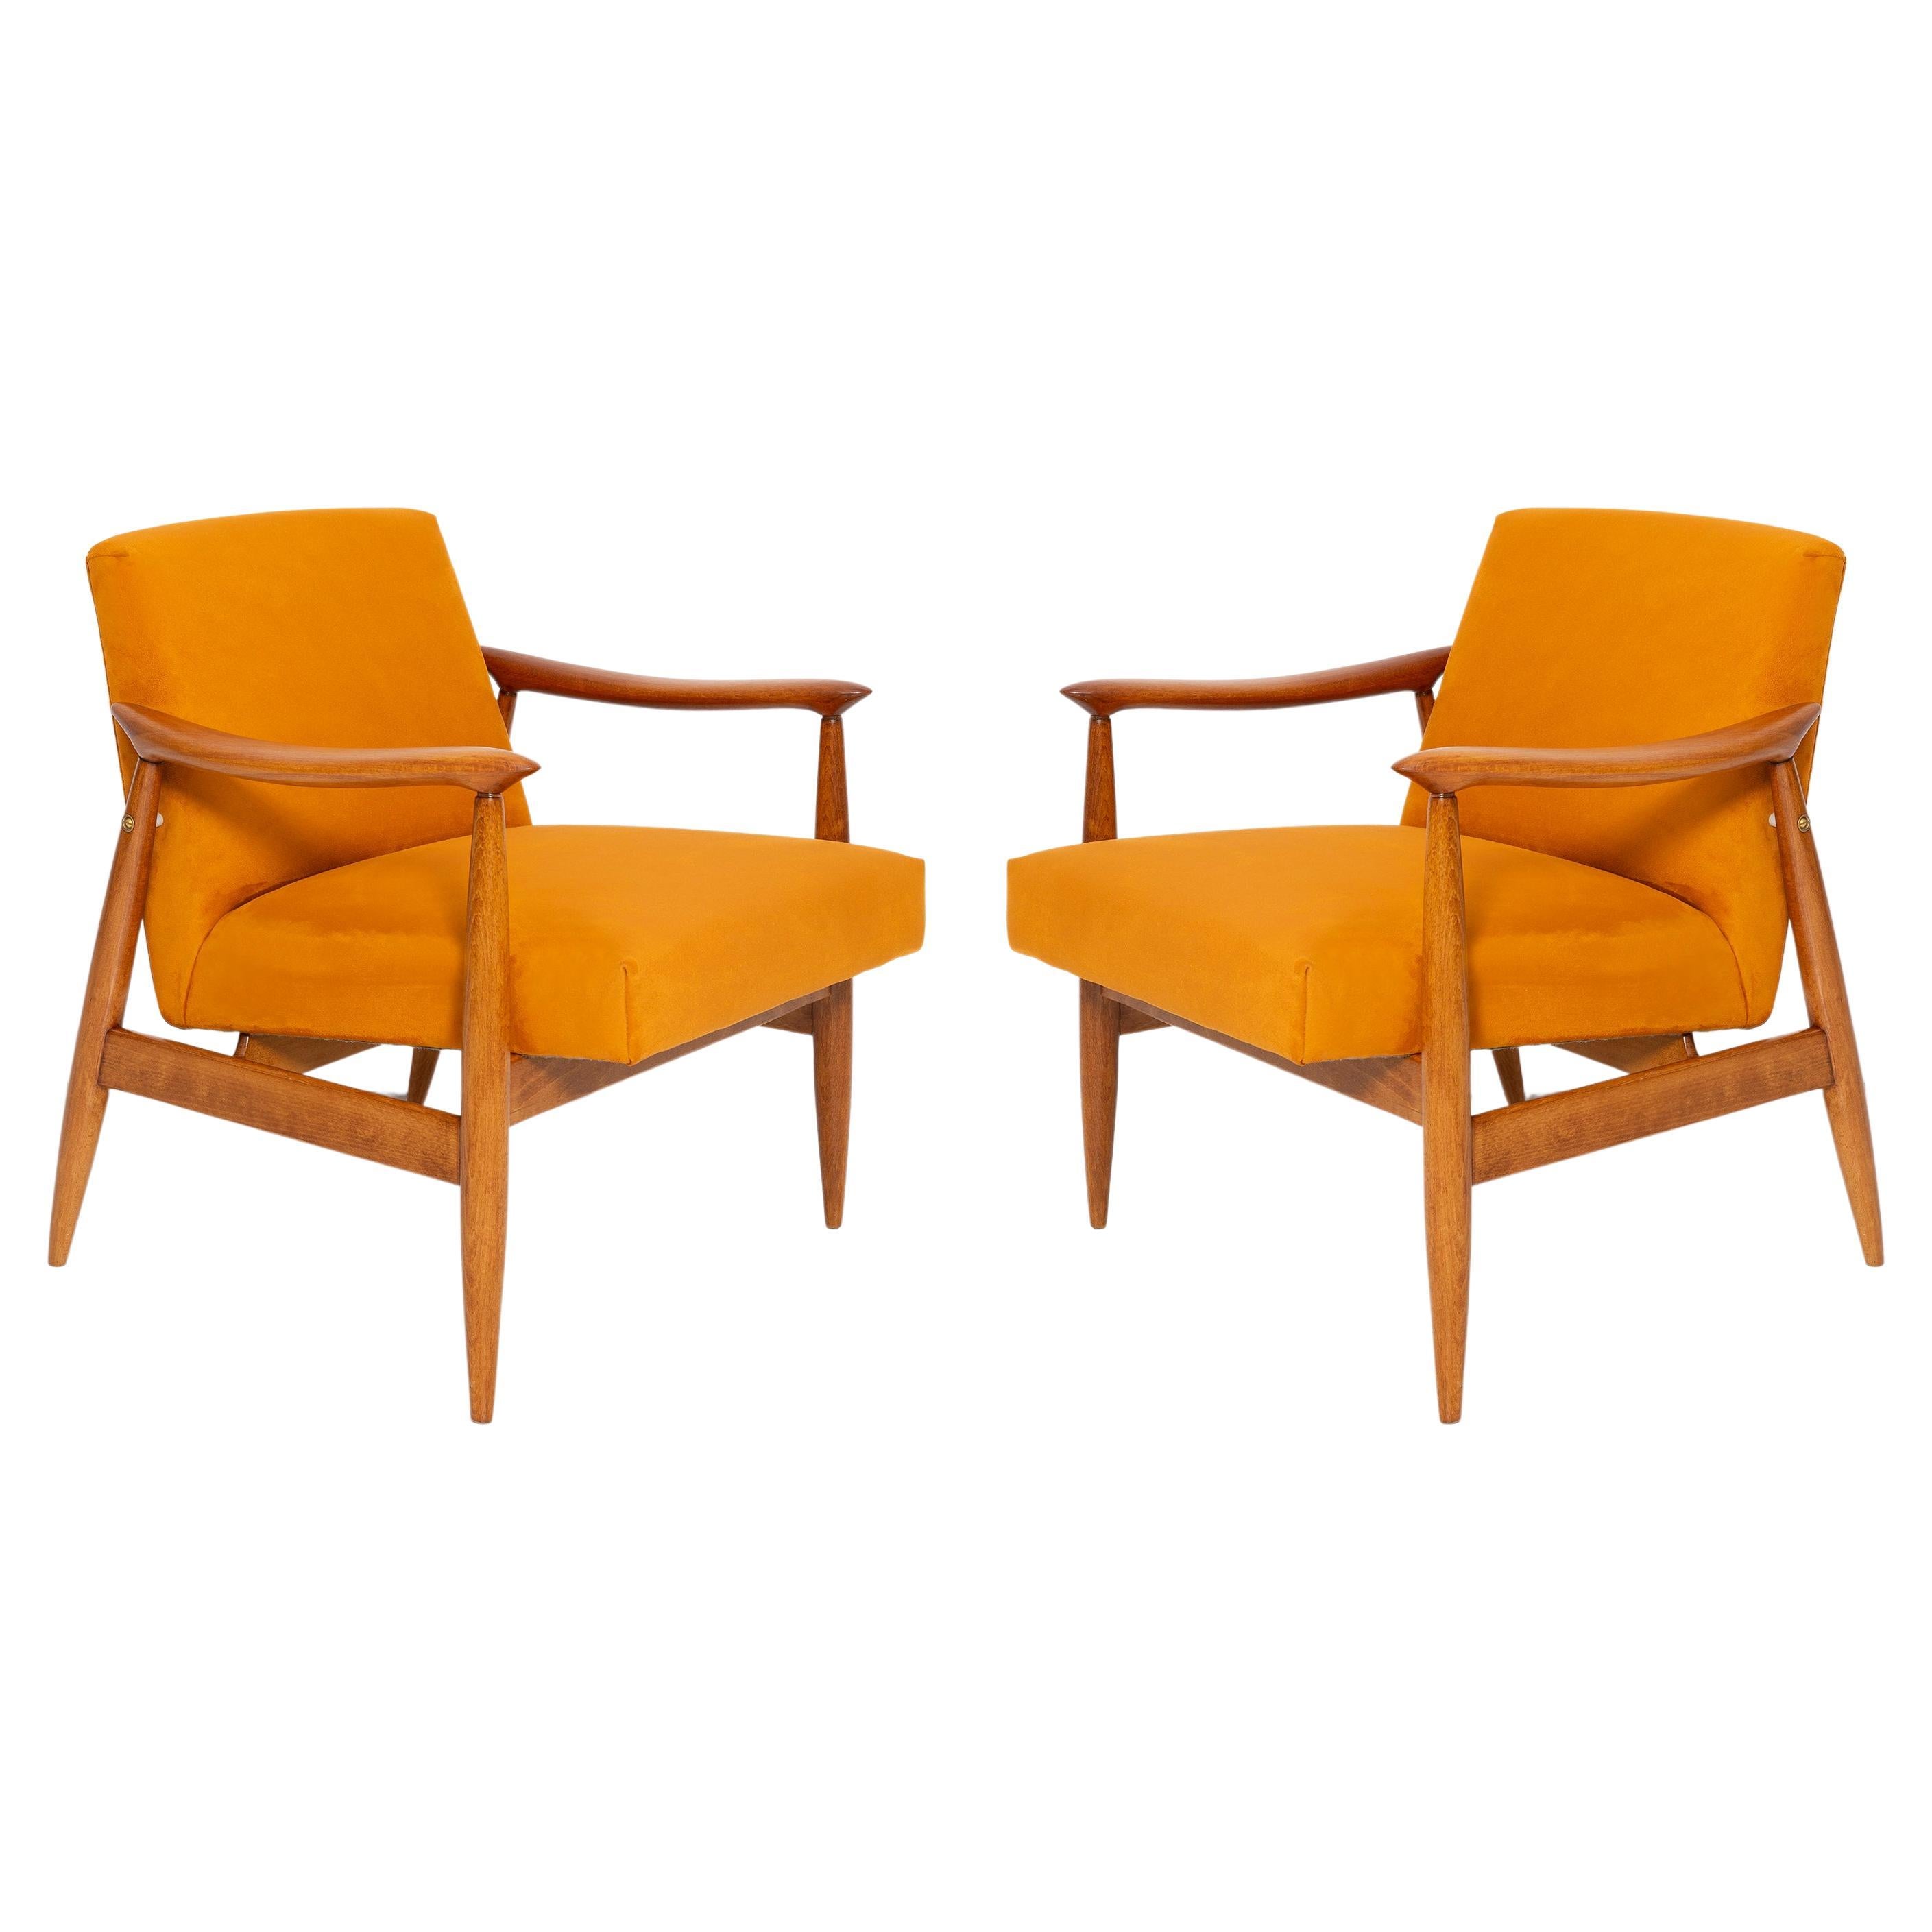 Pair of Mid Century Yellow Armchairs, Designed by J. Kedziorek, Poland, 1960s For Sale